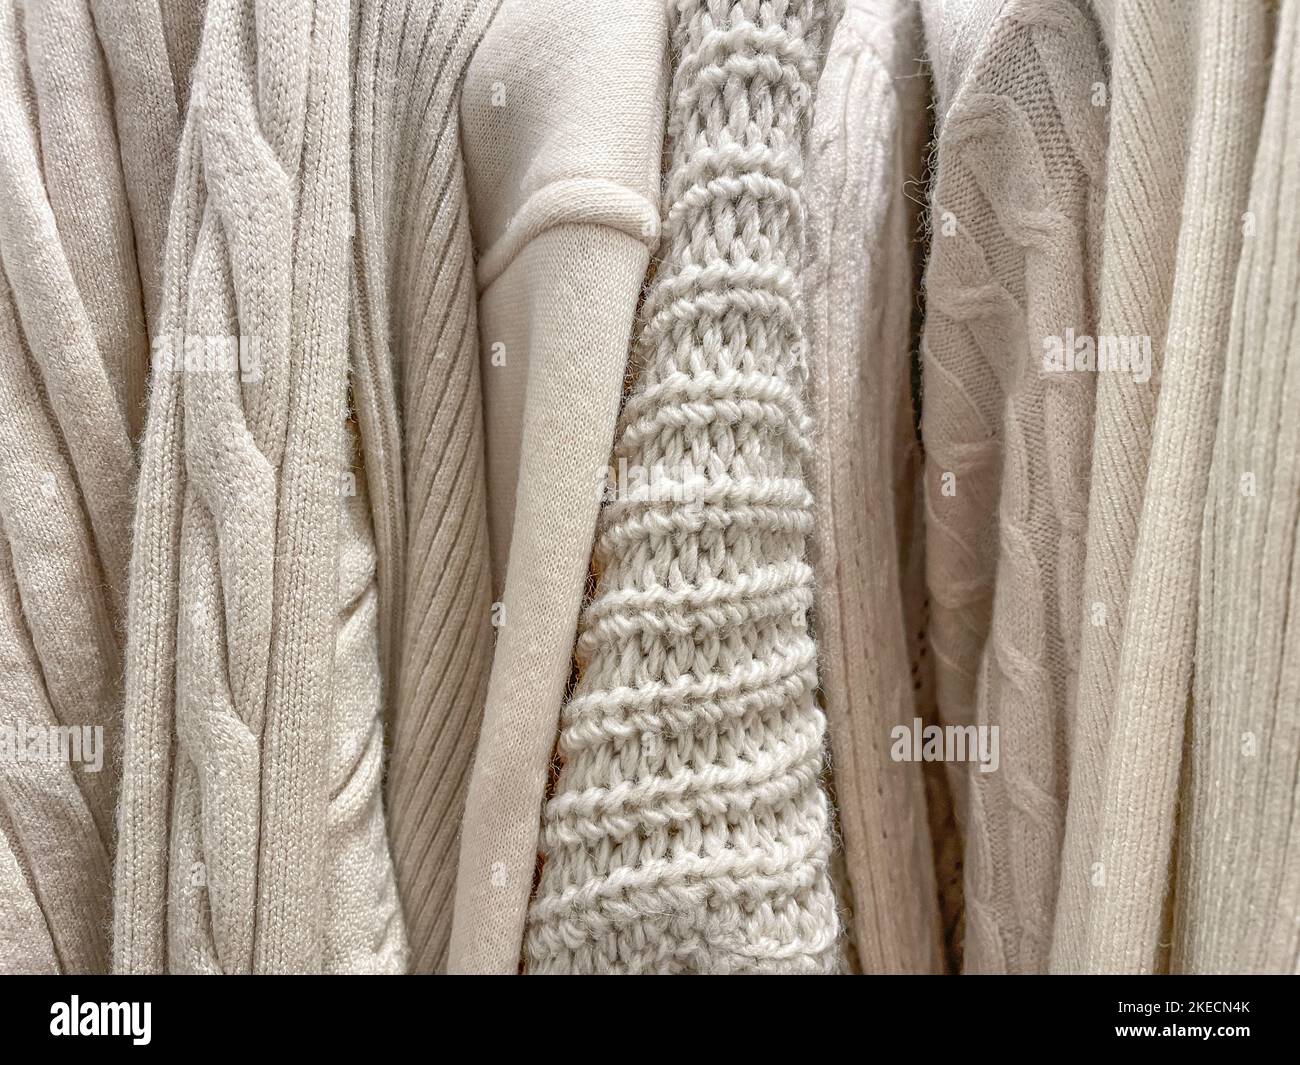 Texture cozy background photo of different knitted sweaters and jumpers of beige cream color hanging in stack in a store. Fall Winter warm clothes col Stock Photo